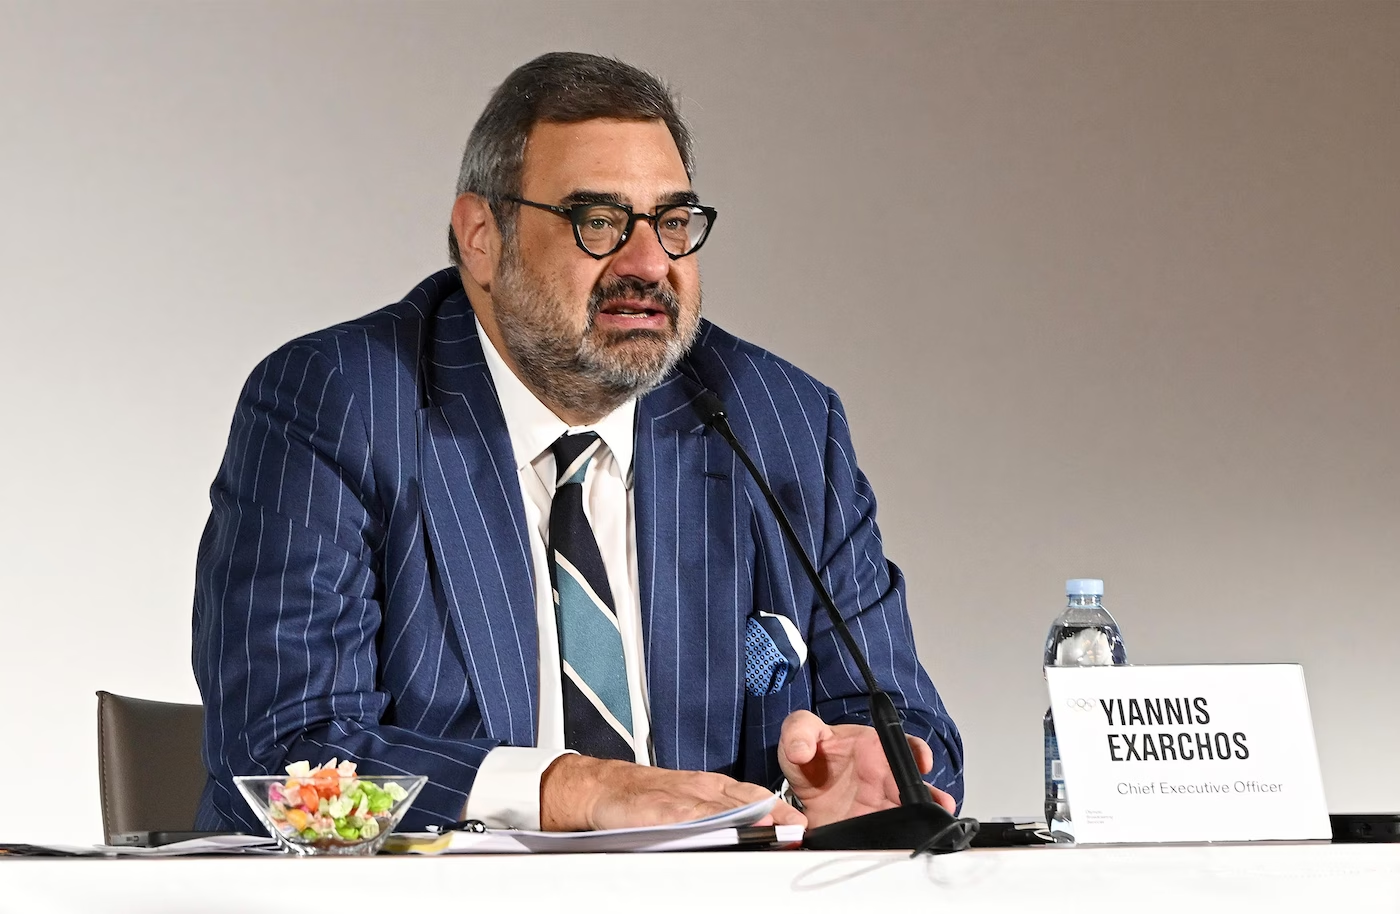 OBS chief executive Yiannis Exarchos revealed details to broadcasters of plans for Milan Cortina 2026, including greater access to athletes ©Milan Cortina 2026